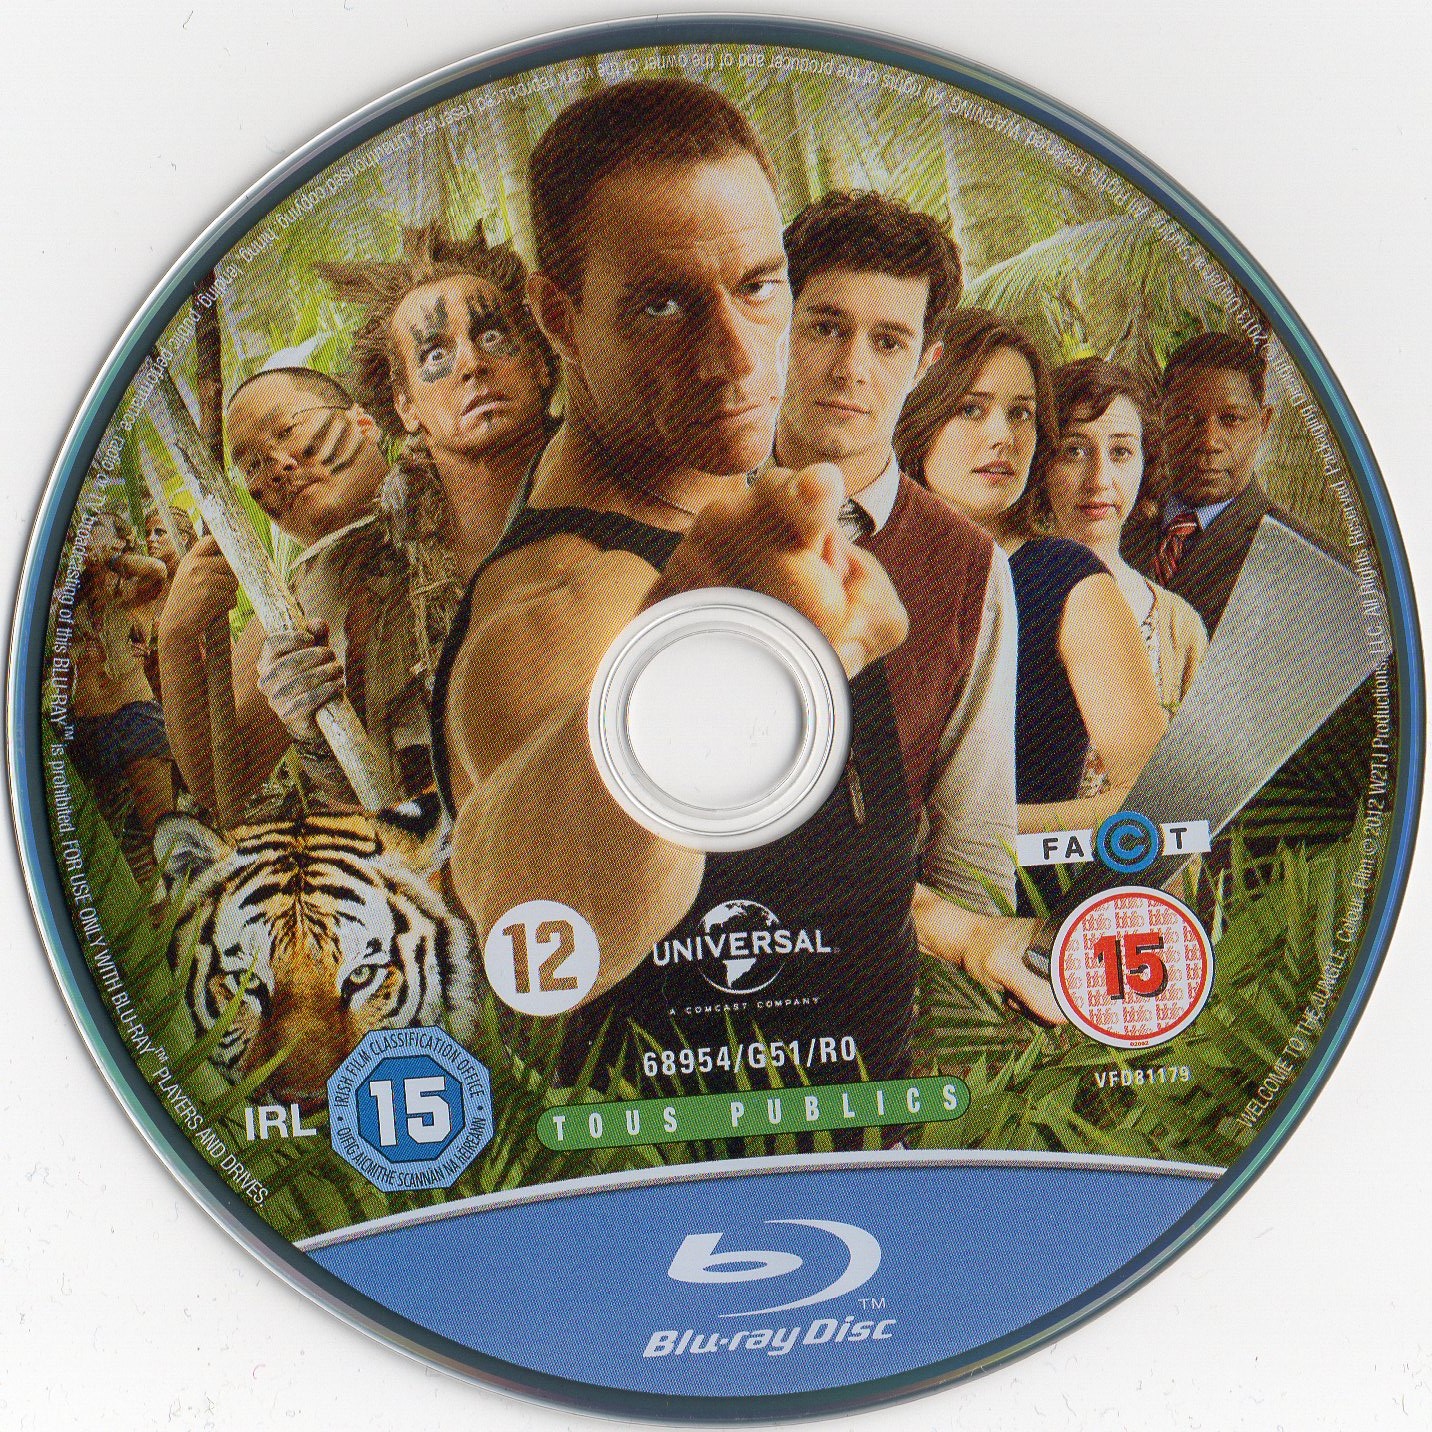 Welcome to the jungle (2012) (BLU-RAY)